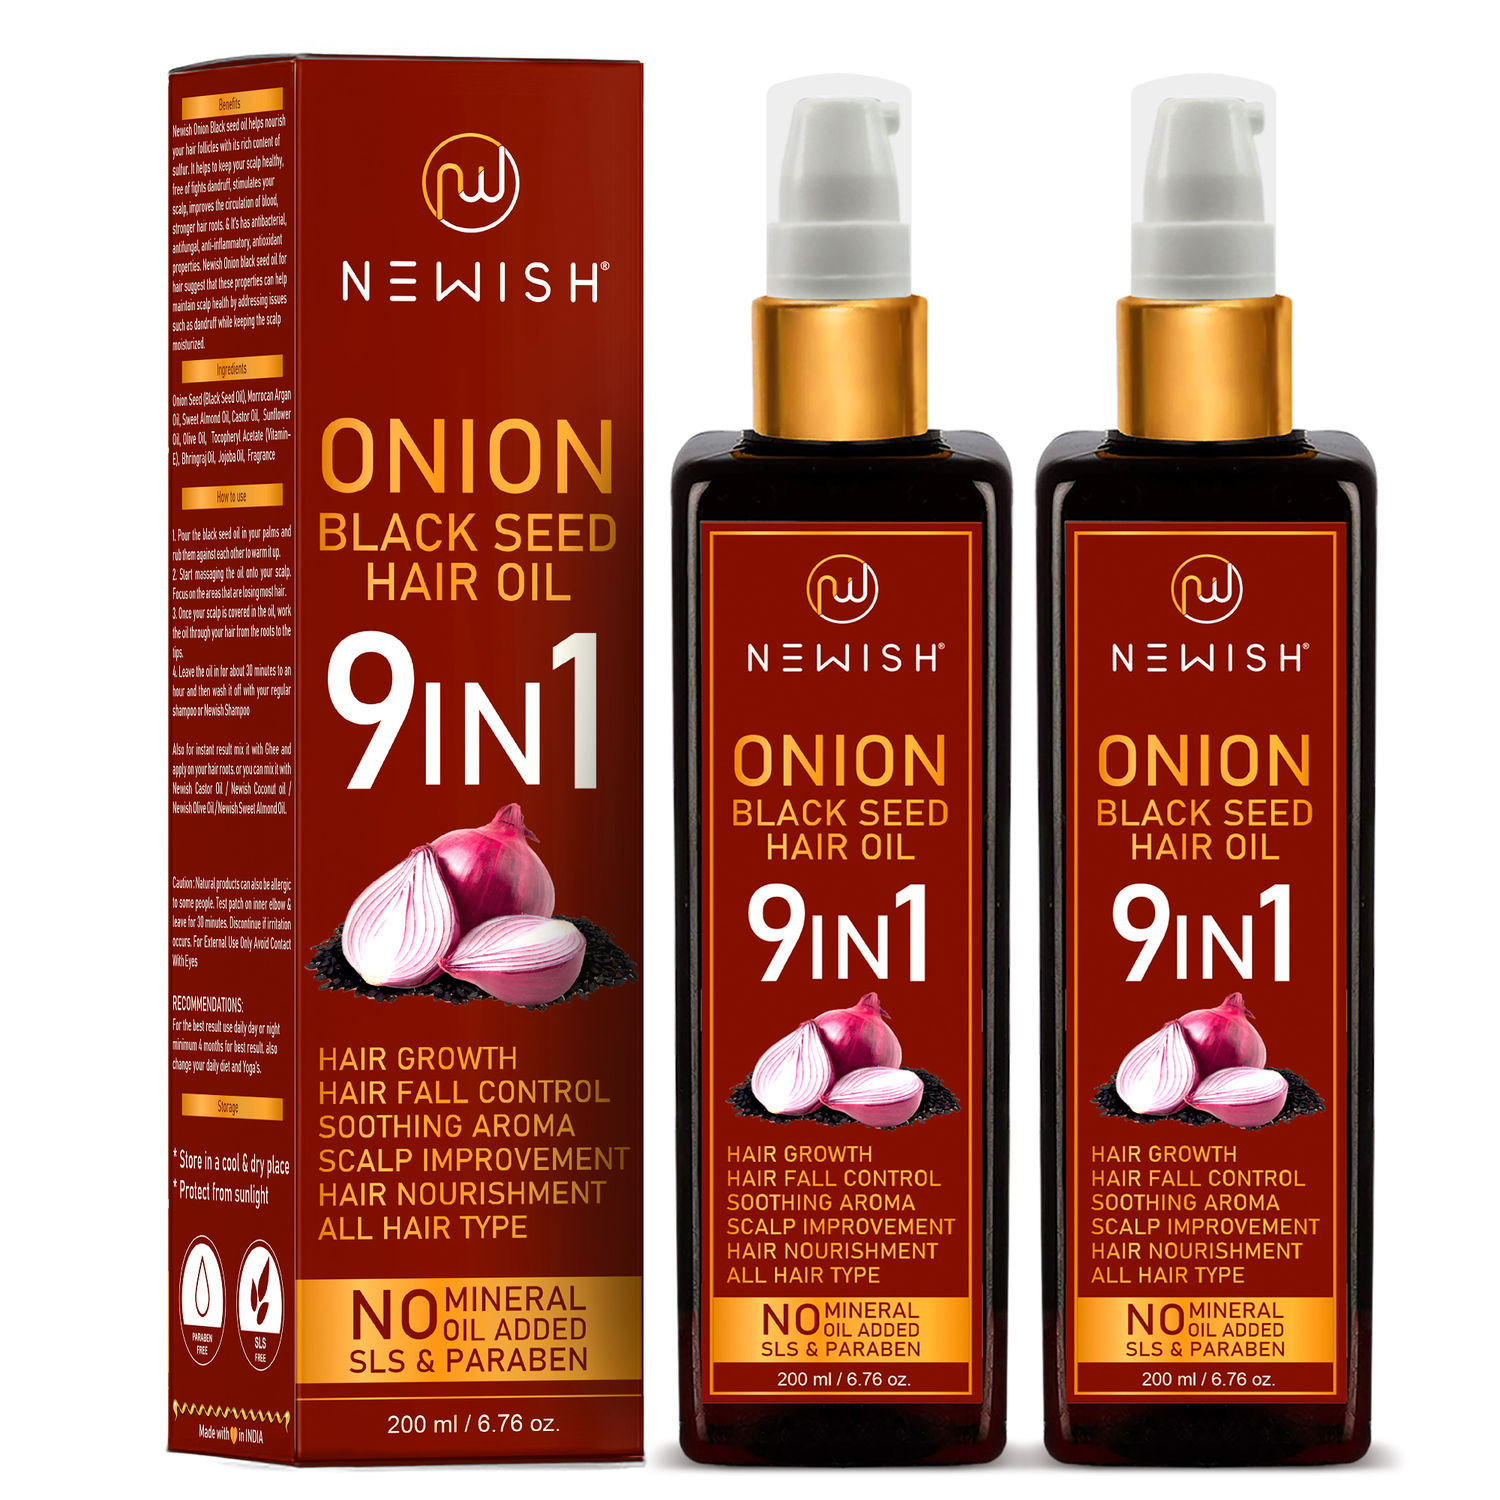 A Brief Guide on Onion Oil for Hair and Its Benefits  Forest Essentials